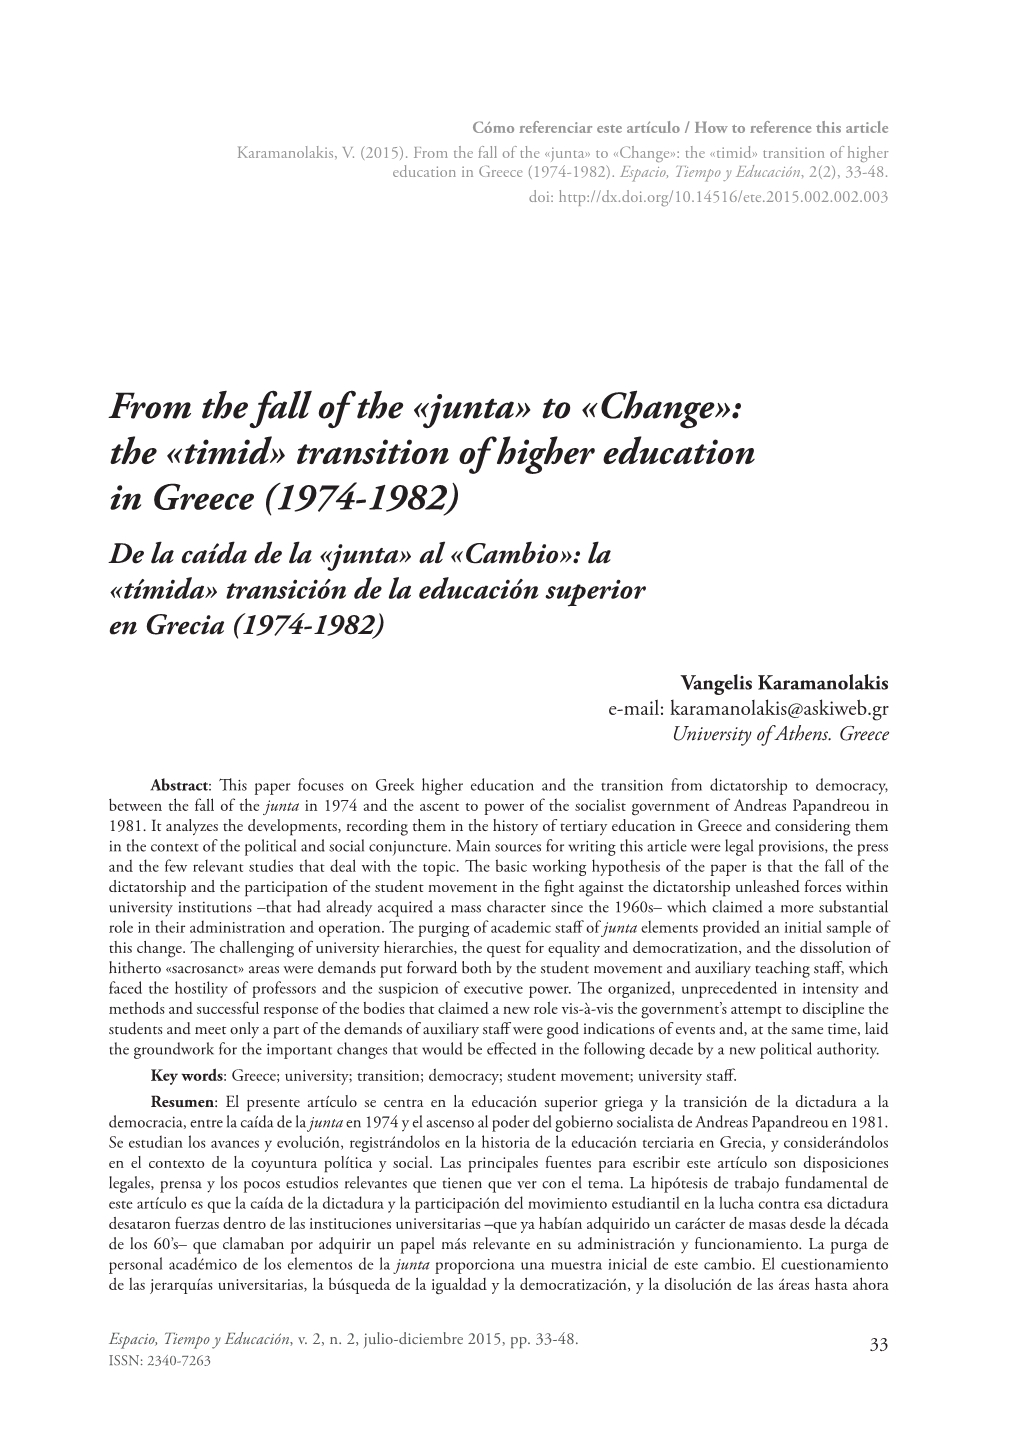 Junta» to «Change»: the «Timid» Transition of Higher Education in Greece (1974-1982)